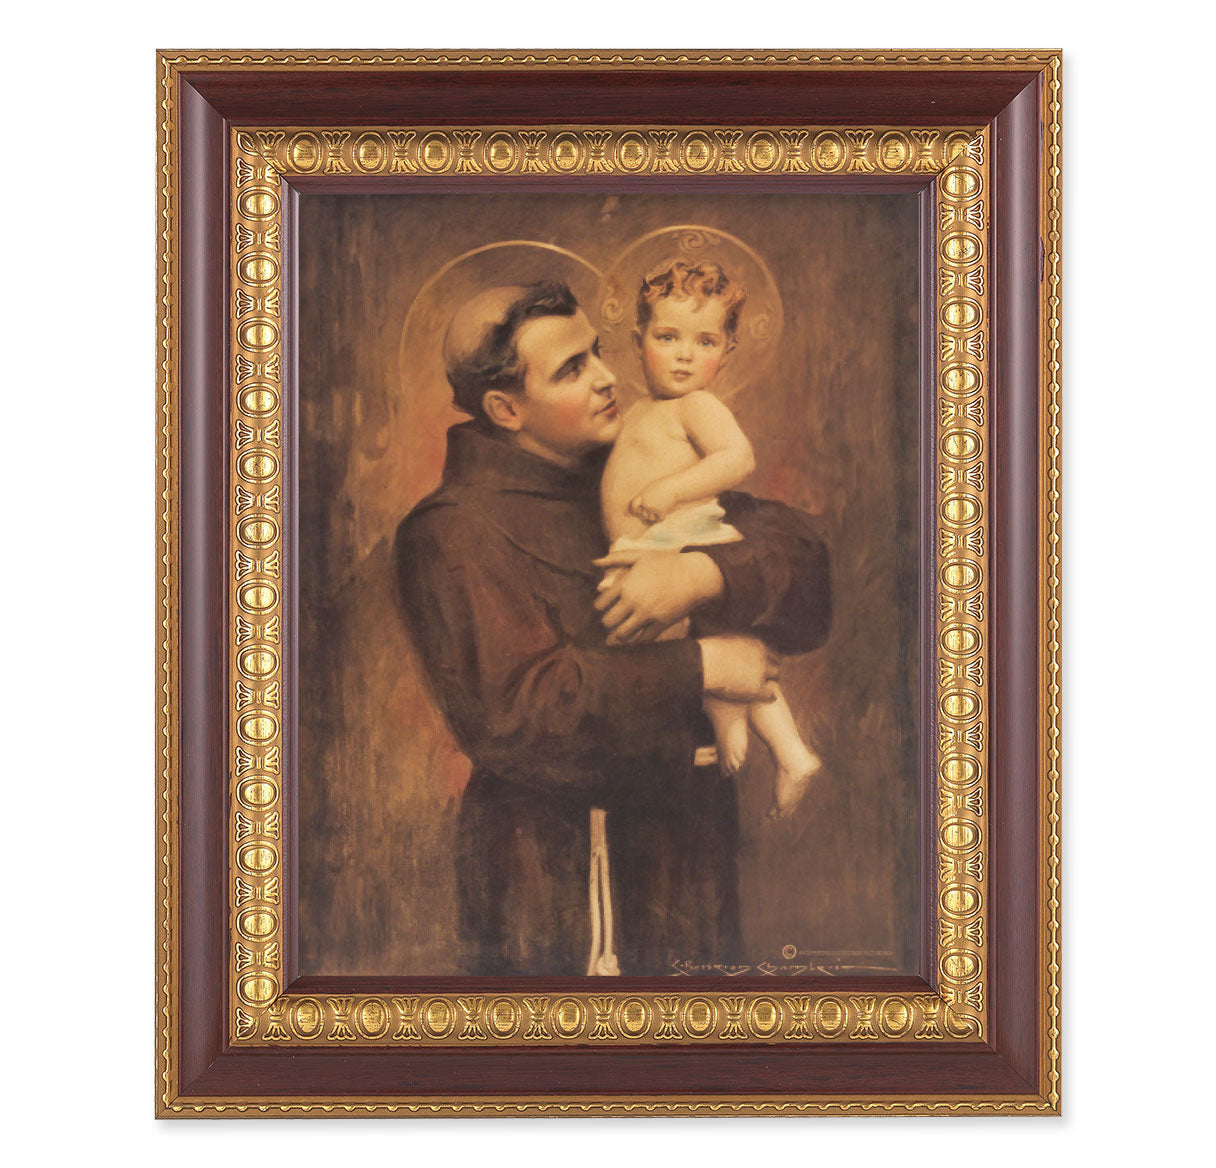 St. Antony with Jesus Picture Framed Wall Art Decor Large, Dark Cherry with Gold Egg and Dart Detailed Frame